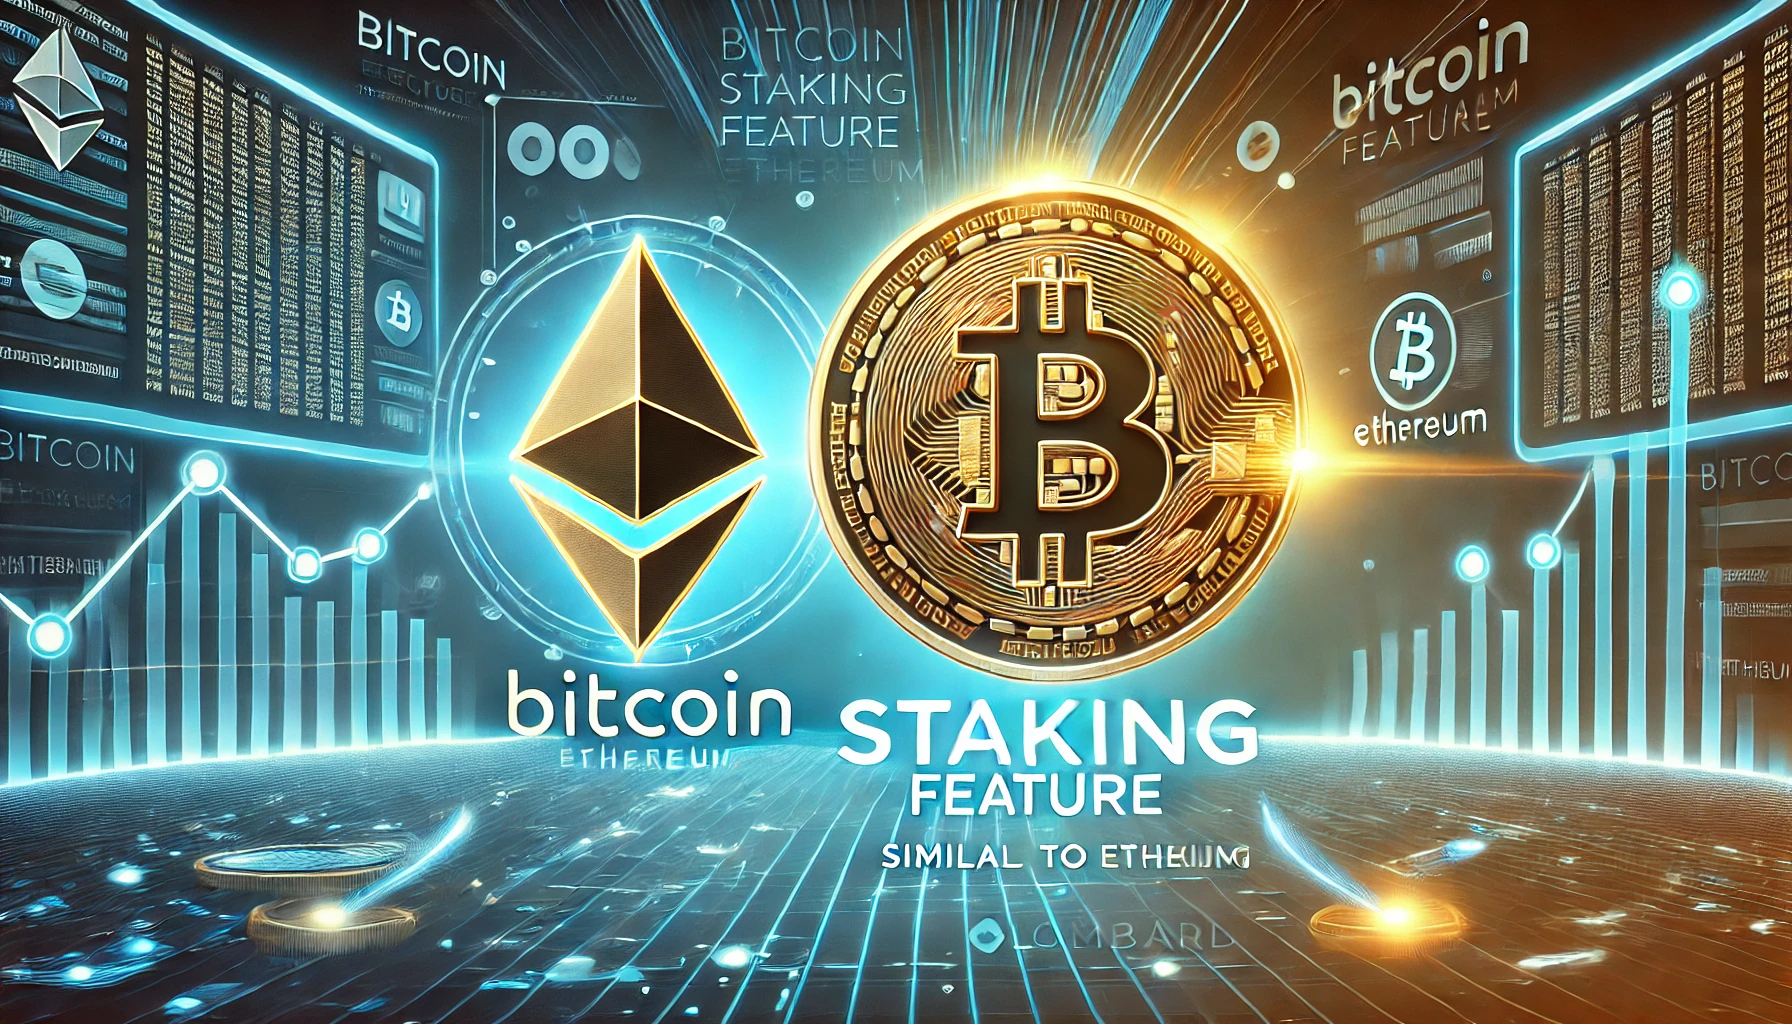 Bitcoin Gets Staking Feature as Startup Lombard Introduces ‘Ethereum-Like’ Staking Feature